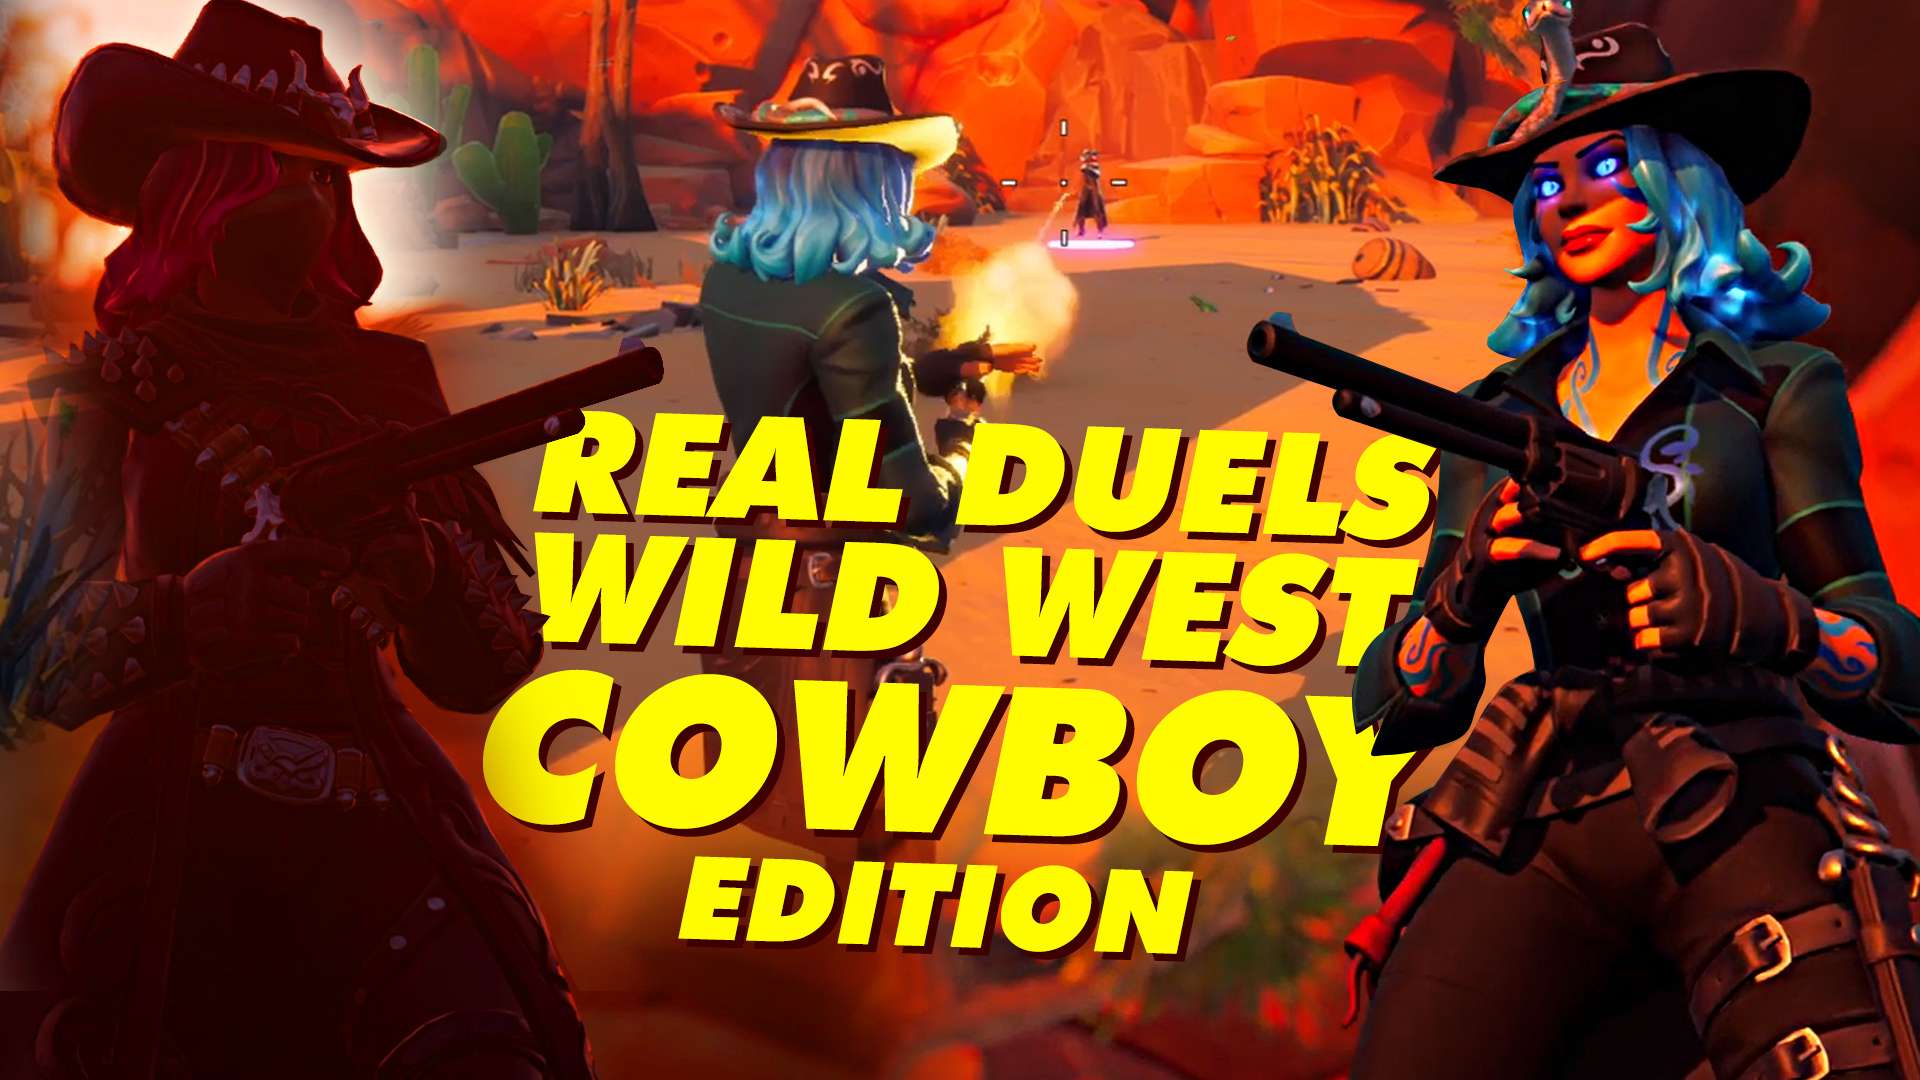 Real Duels Wild West Cowboy Edition